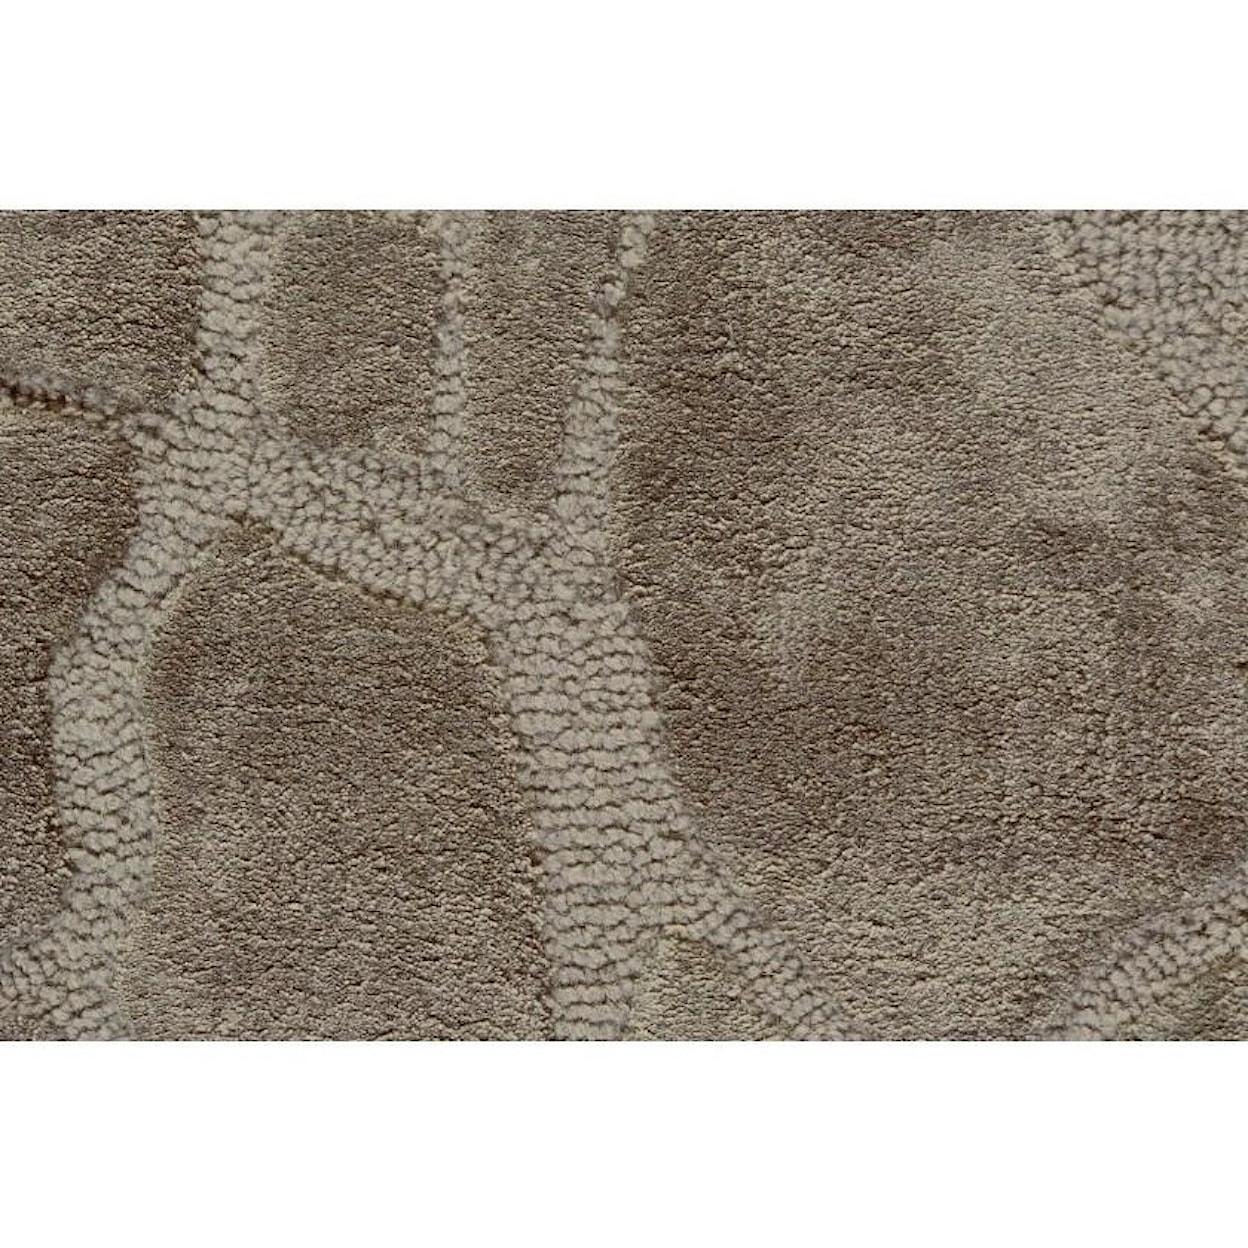 Feizy Rugs Mali Pewter 9'-6" x 13'-6" Area Rug